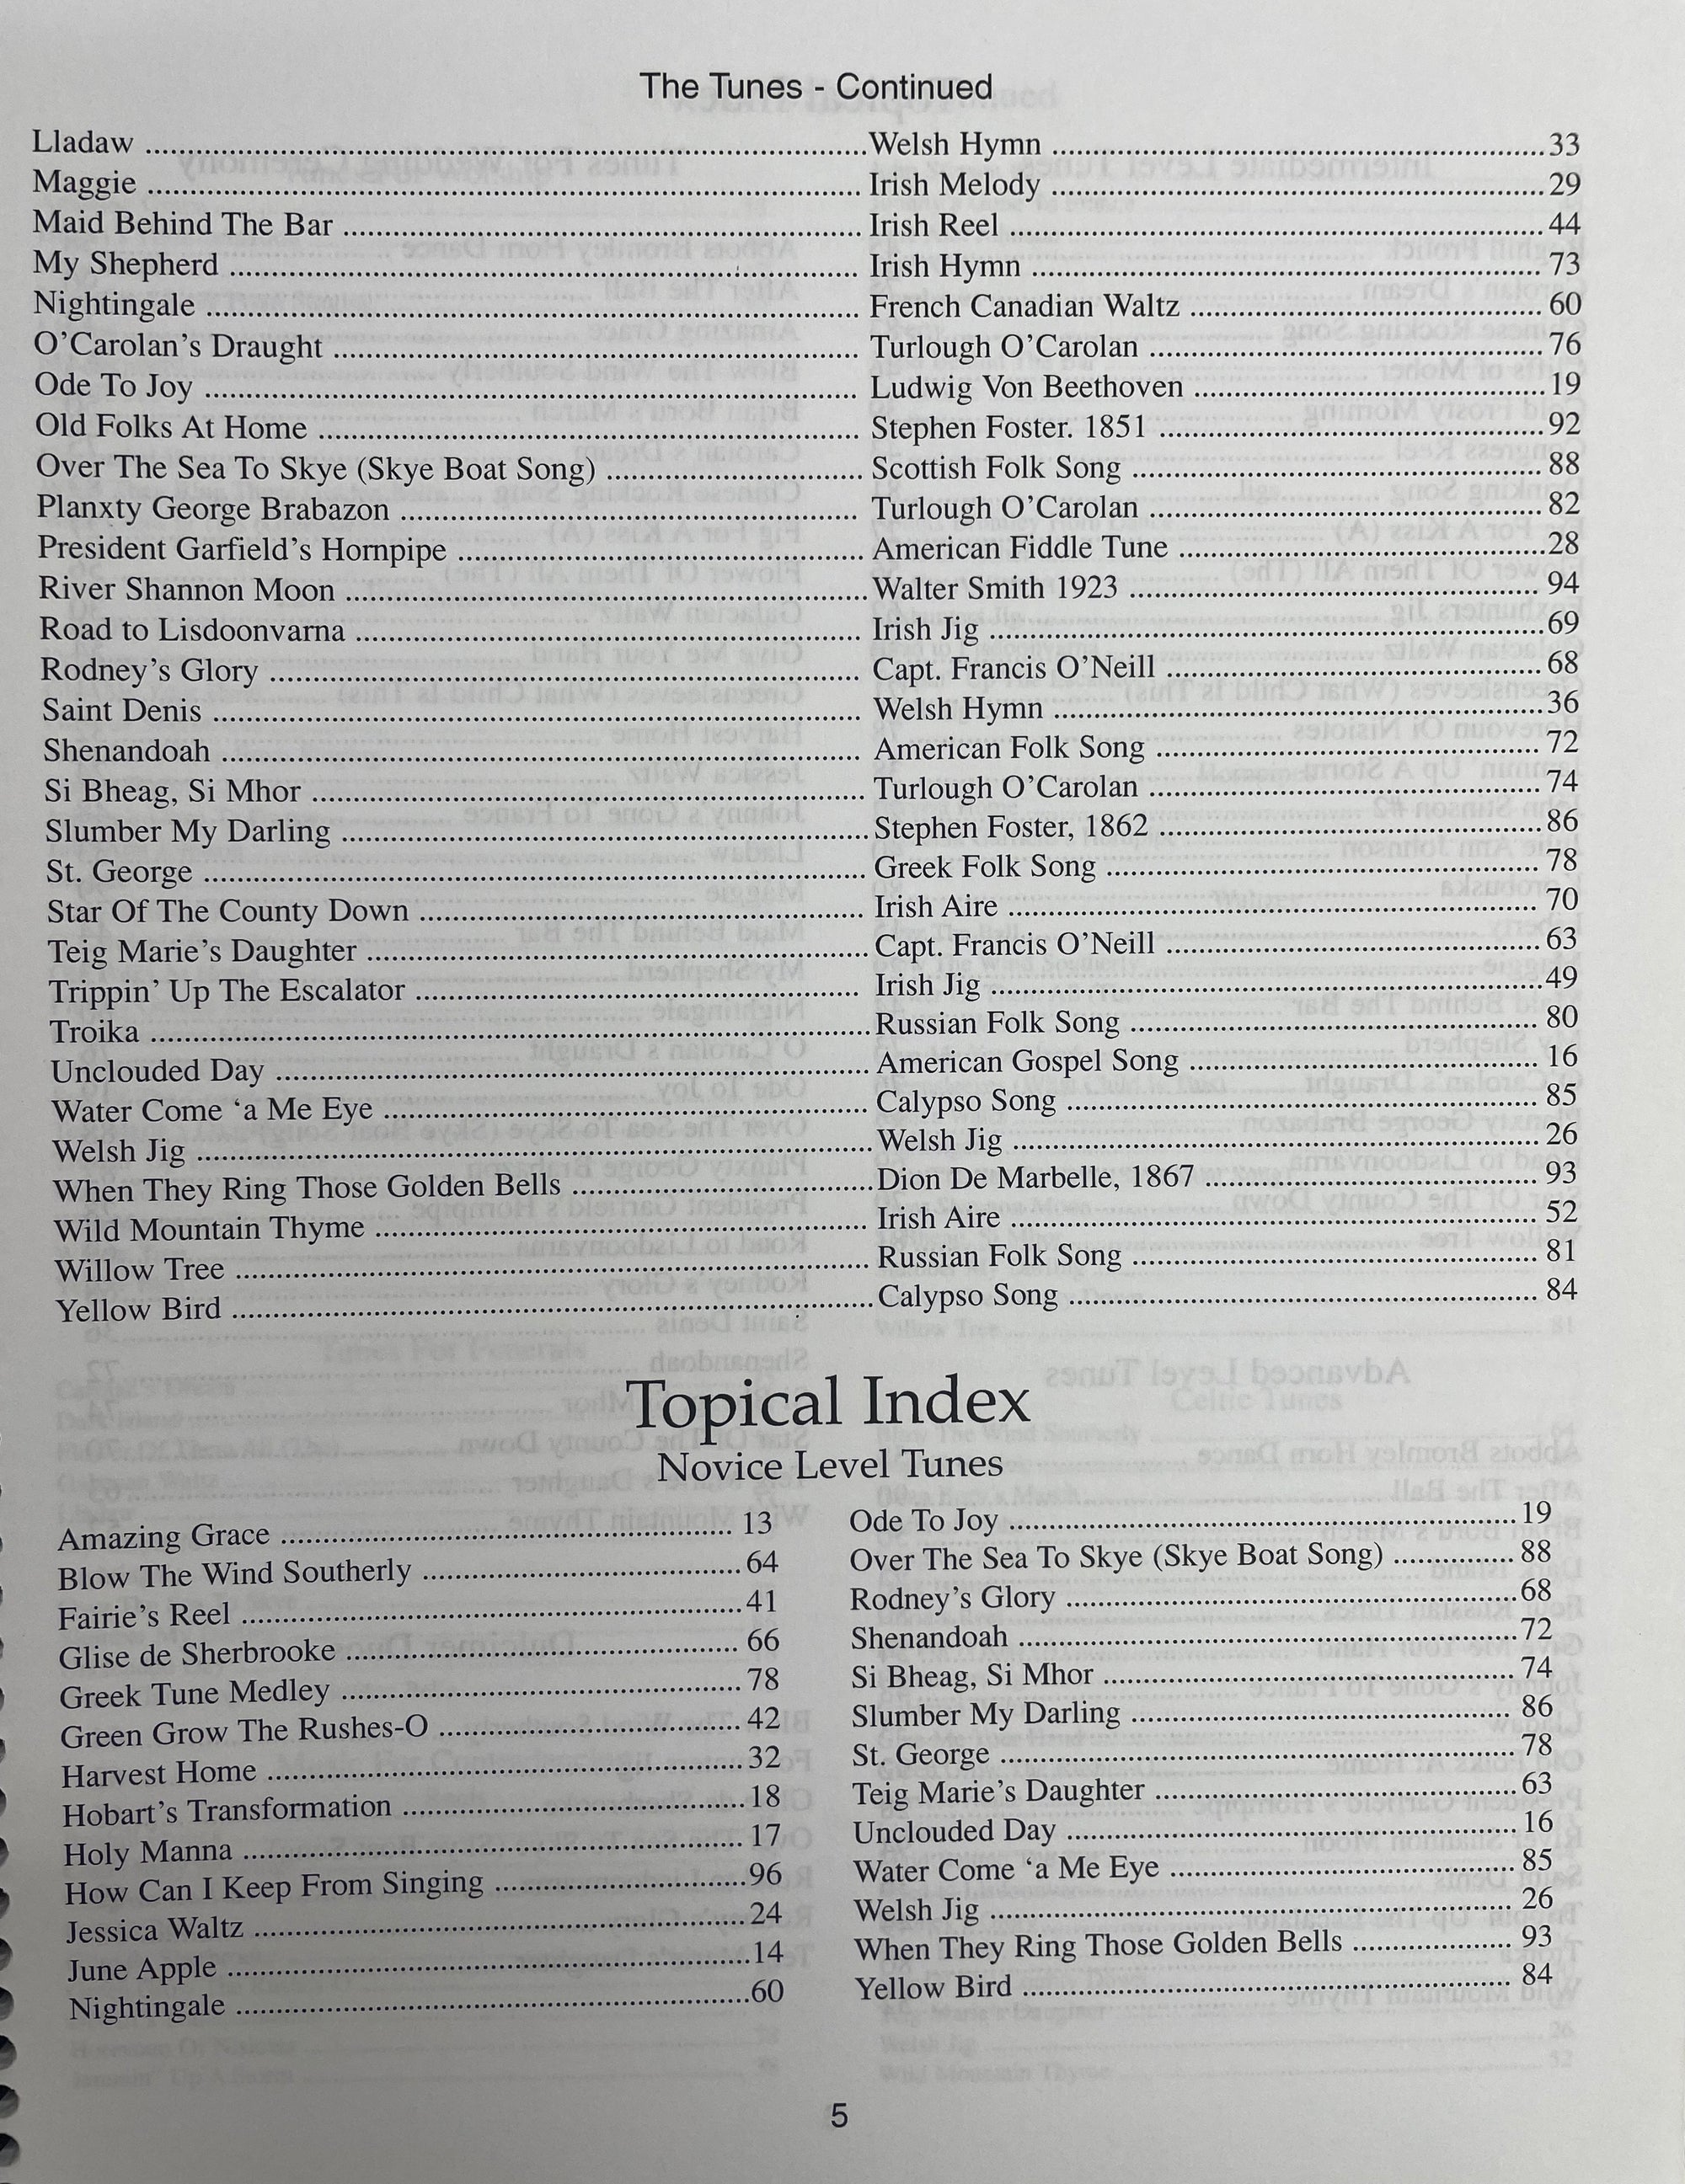 A contents page of Hammered Dulcimer for Special Occasions by Peggy Carter, listing tunes such as "Liadov," "My Shepherd," and "Give The Fiddler A Dram," along with a topical index of novice level tunes like "Amazing Grace" and "Greensleeves." Perfect for weddings, this collection features dances and melodies to set the celebratory mood.